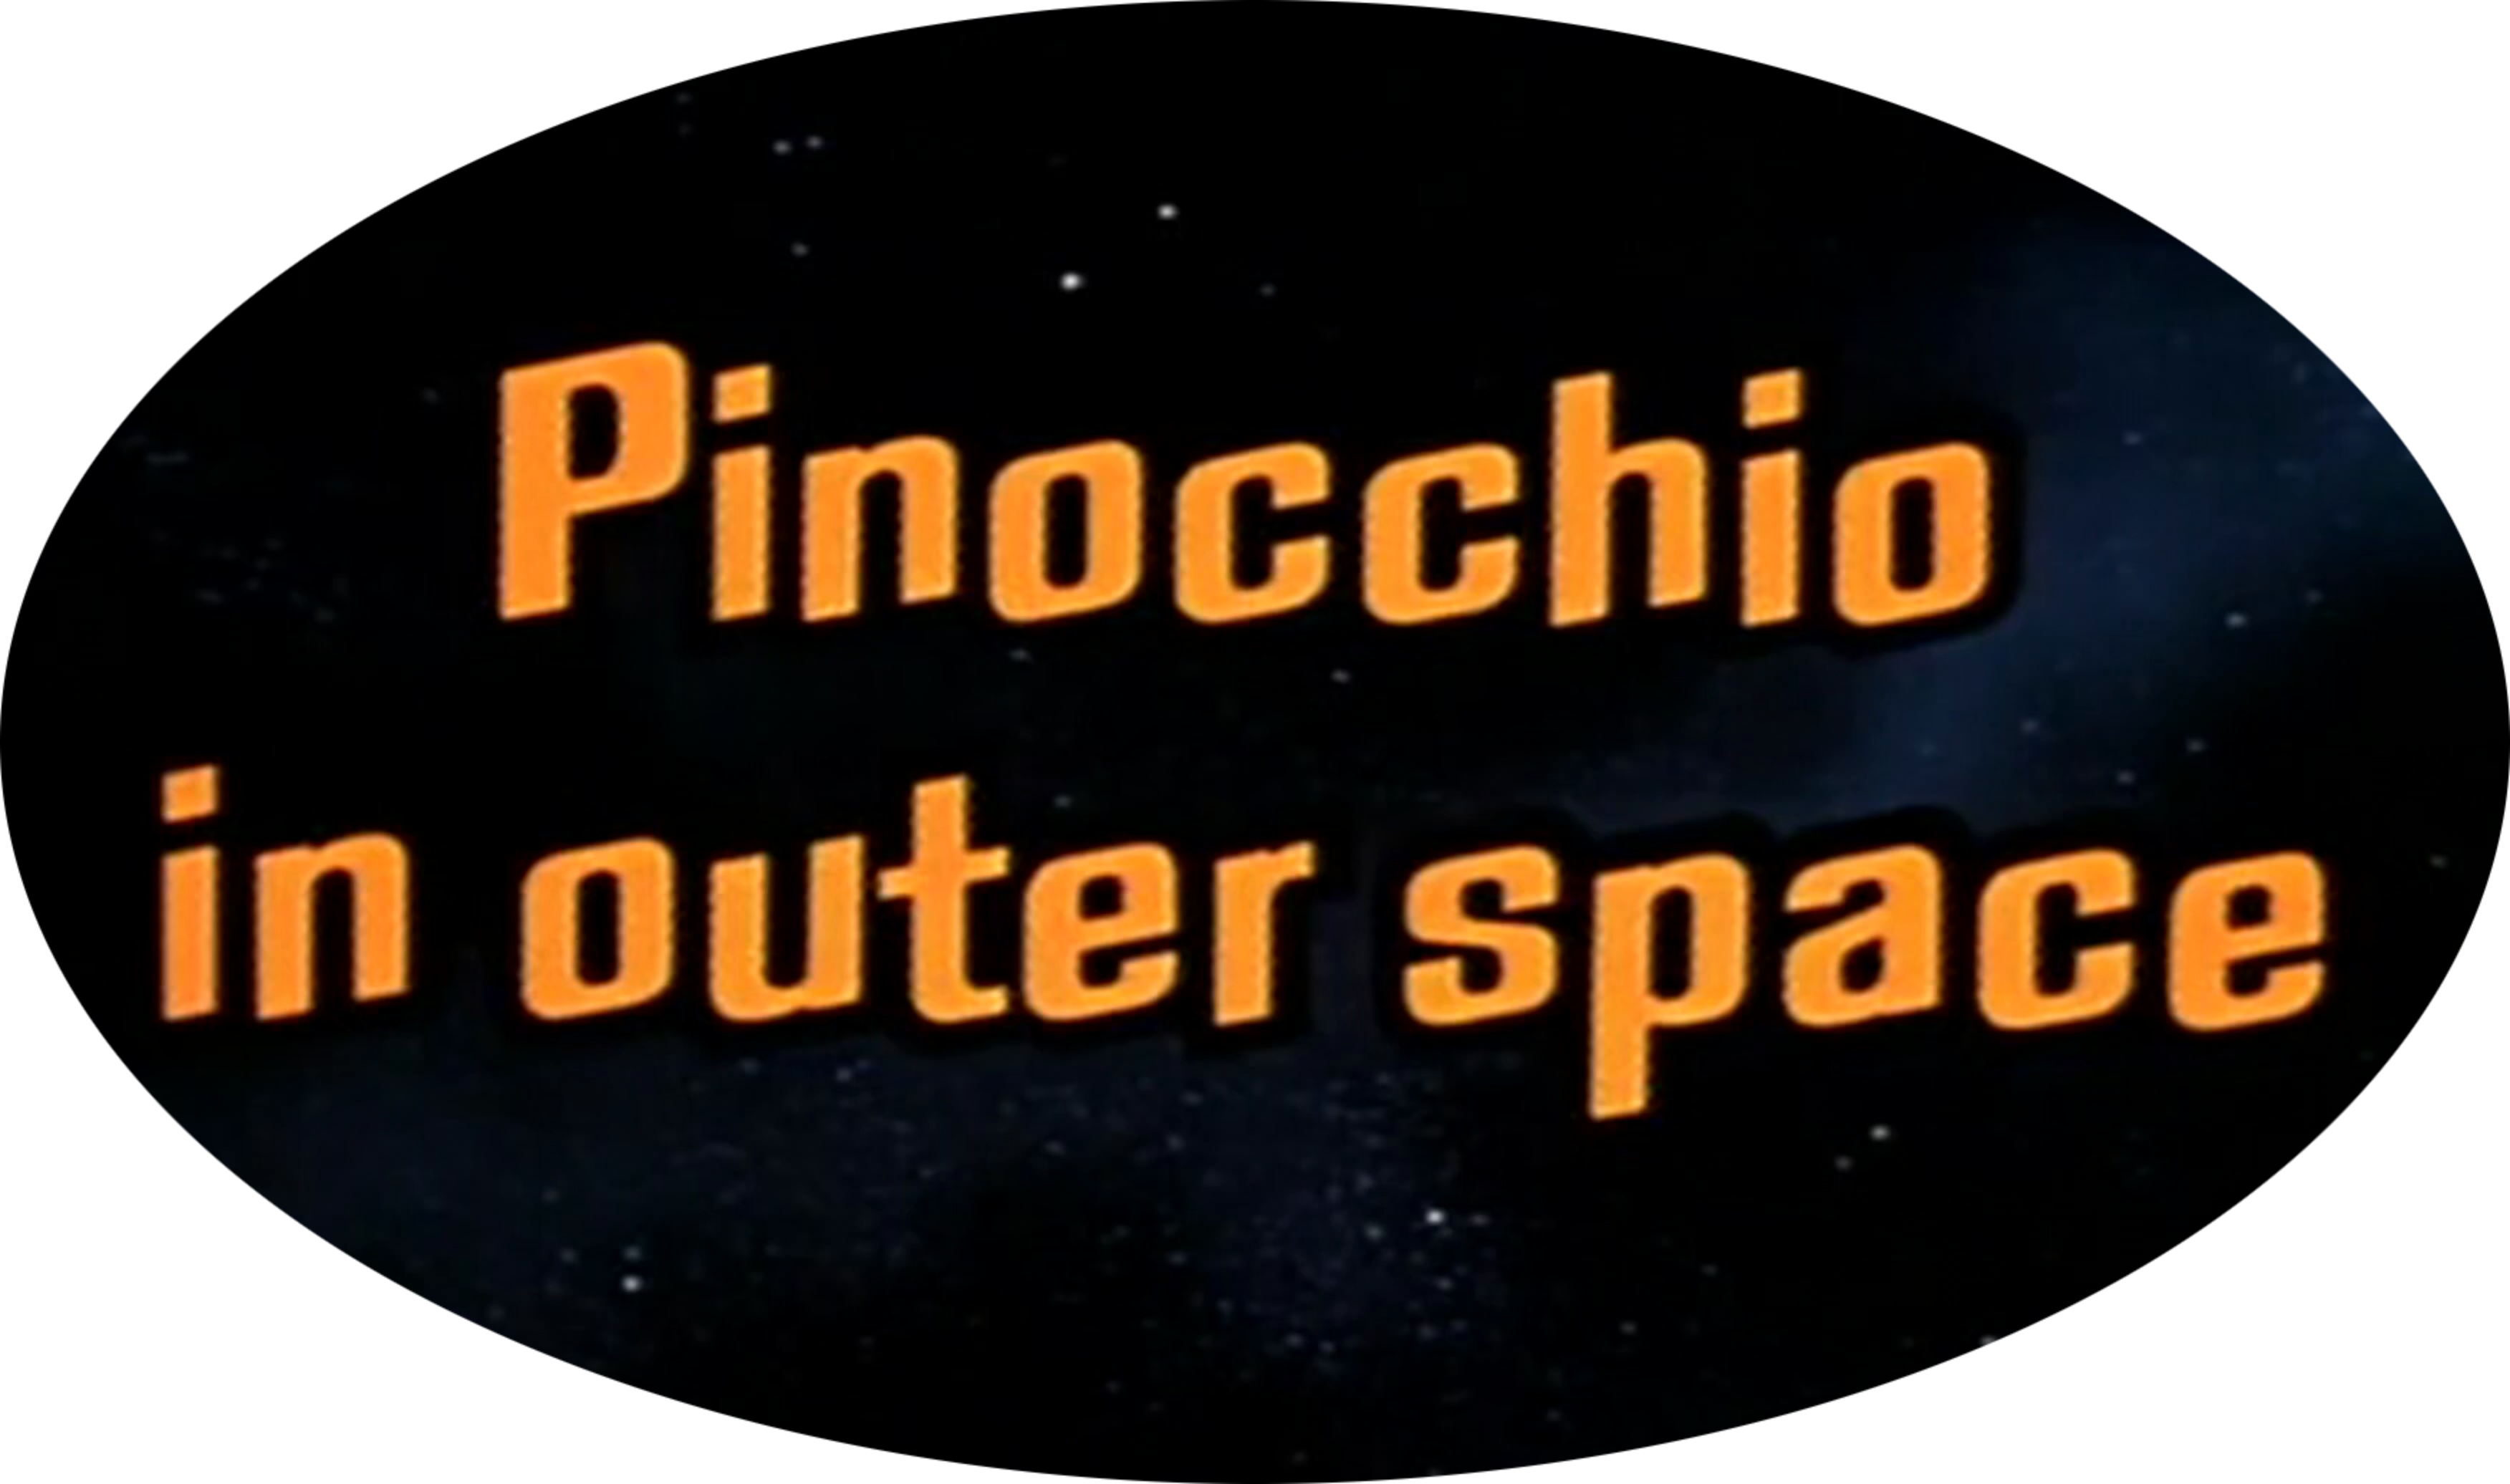 Pinocchio in Outer Space (1 DVD Box Set)